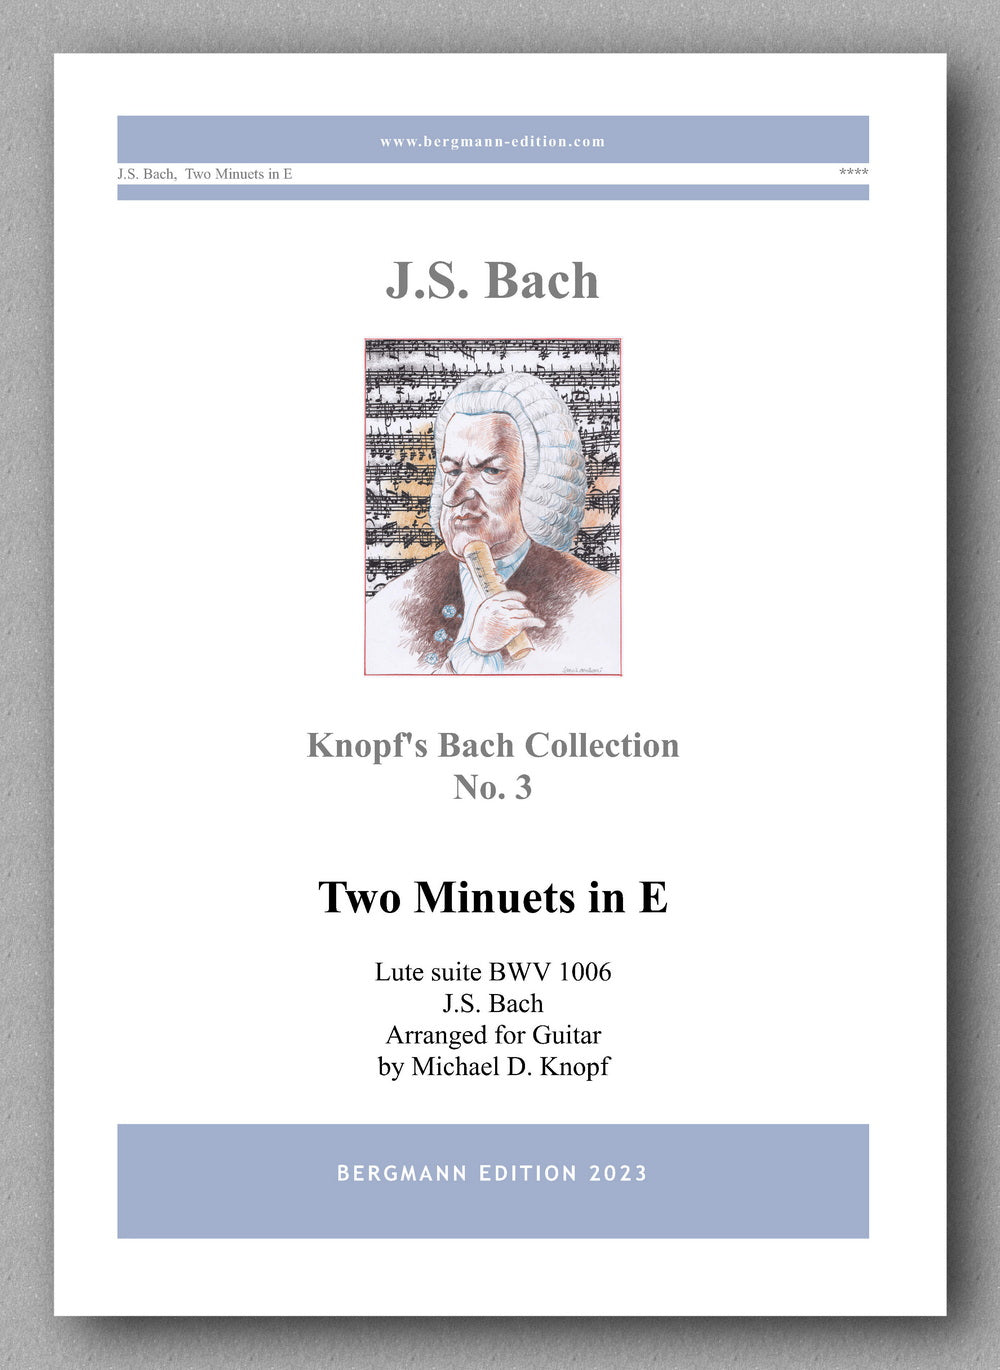 J.S.Bach, Two Minuets in E, BWV 1006 - preview of the cover